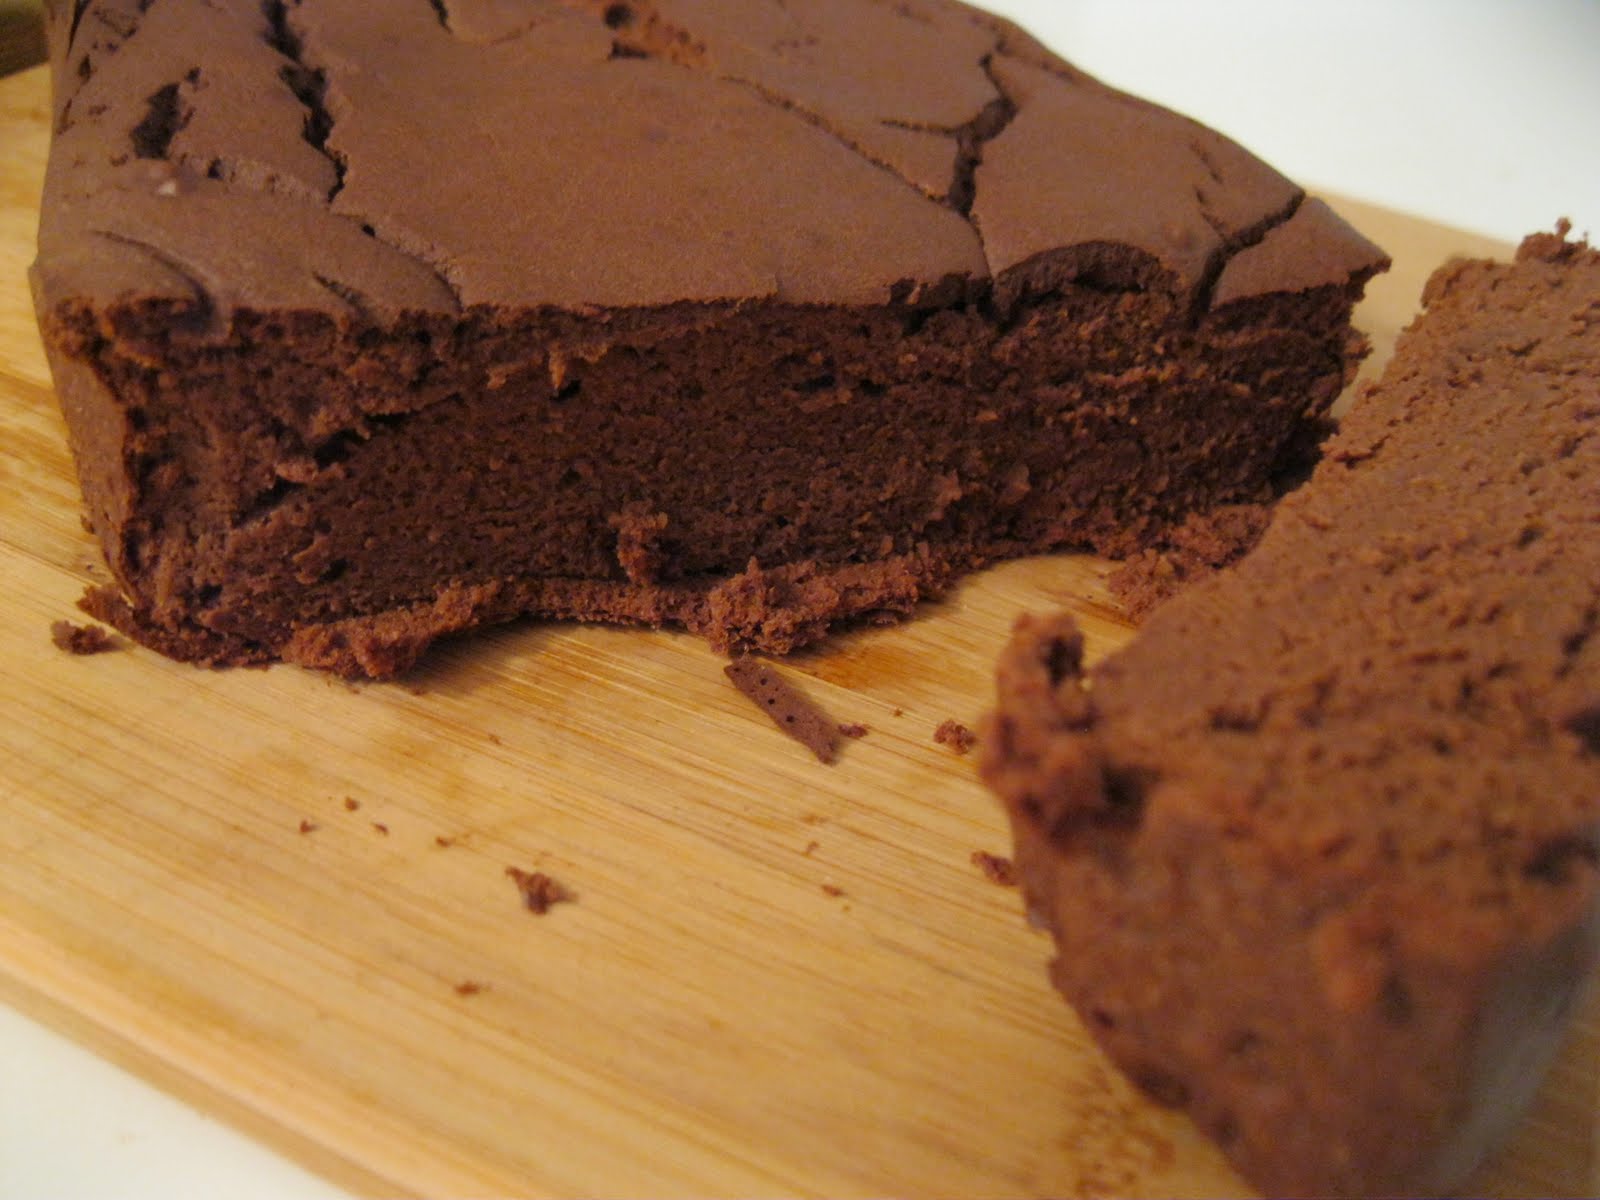 The District Chocoholic: Chocolate Chickpea Cake: Get some Extra Fiber